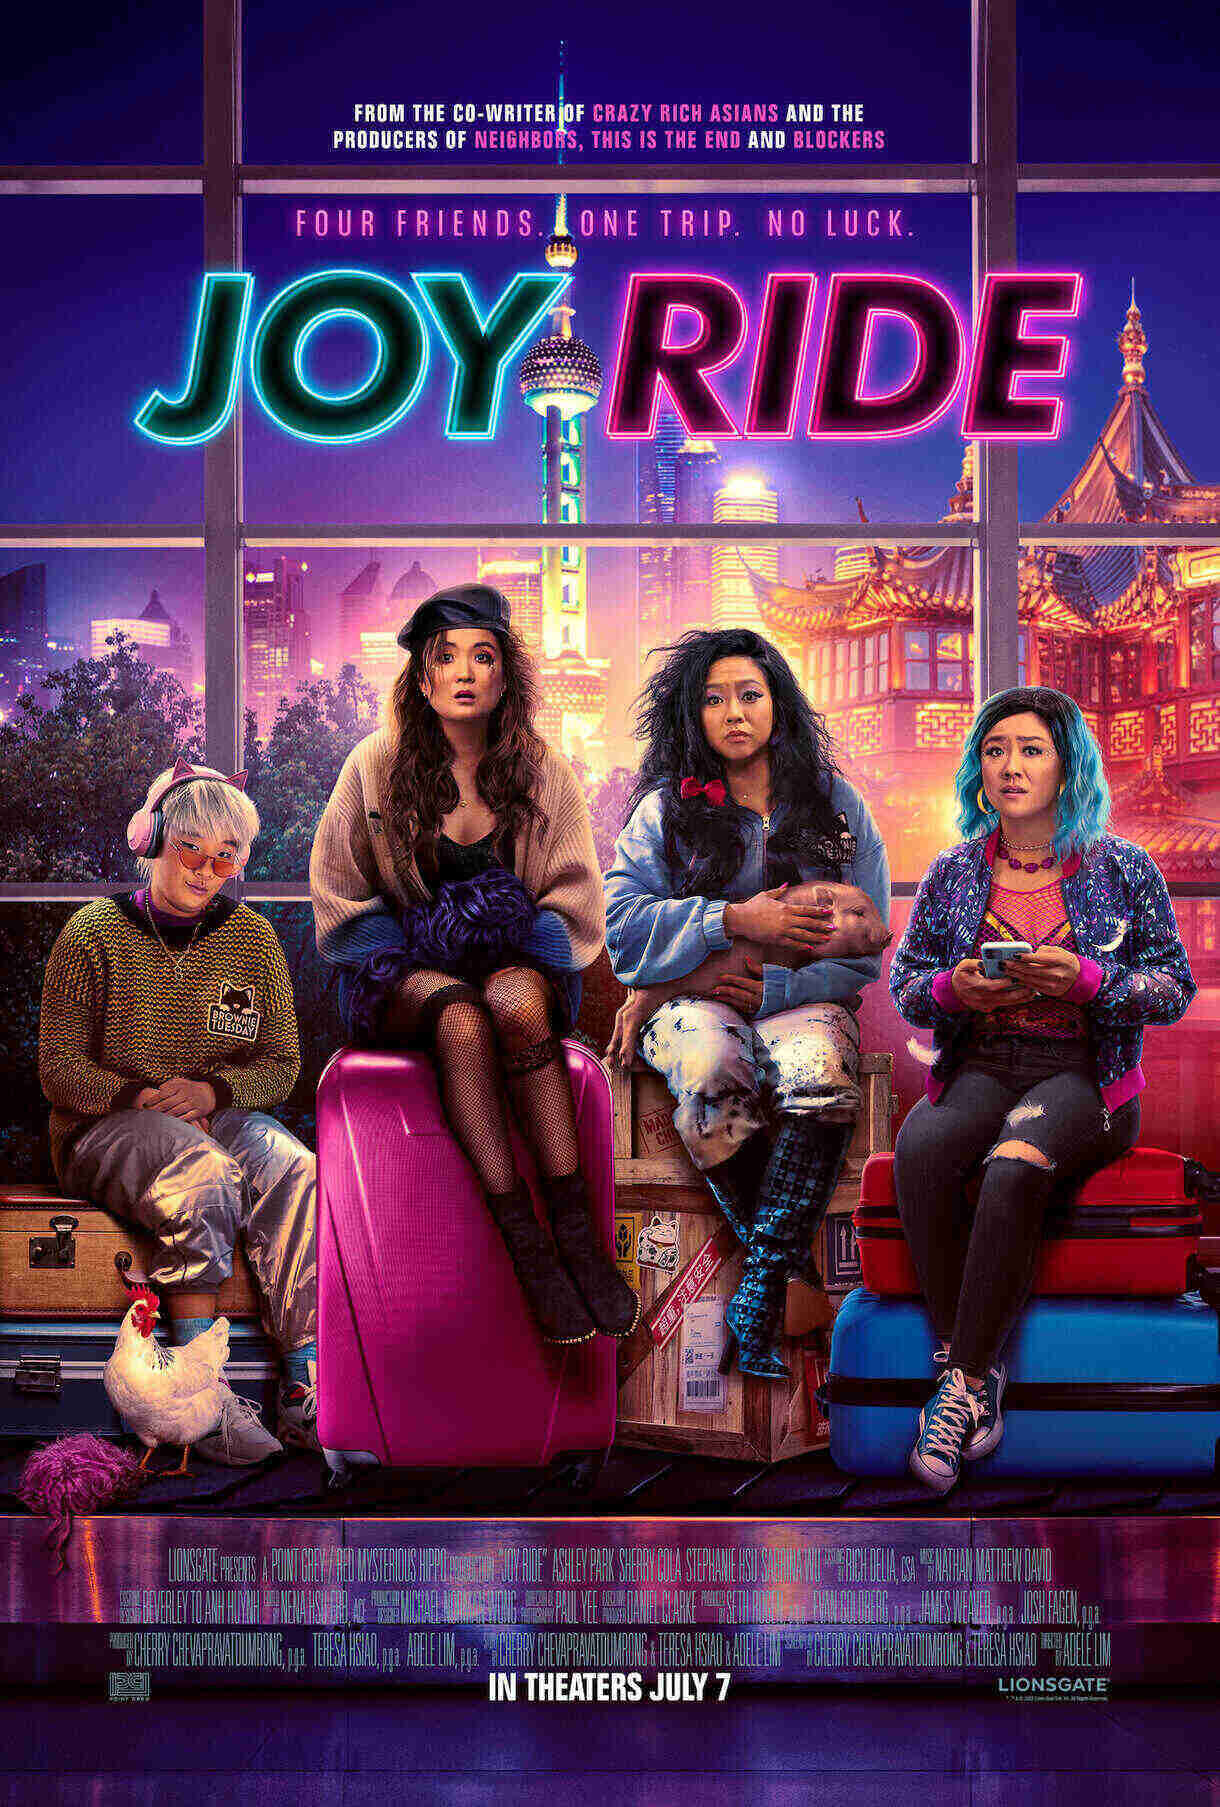 Theatrical poster for Joy Ride. Courtesy of Lionsgate.